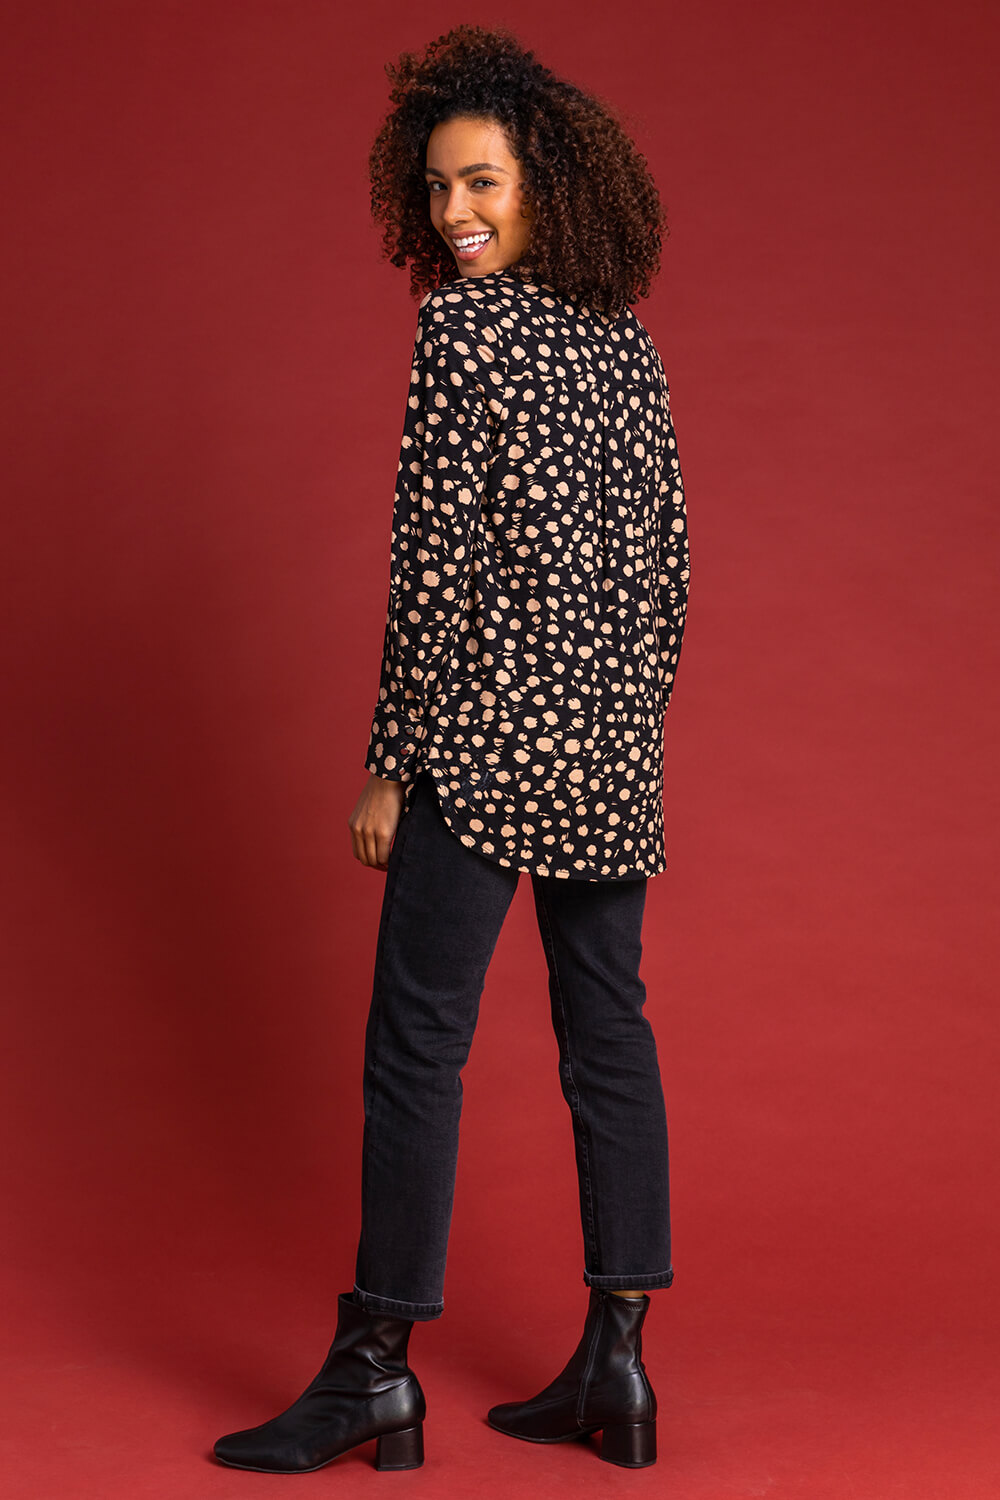 Black Spot Print Button Up Long Sleeve Blouse, Image 2 of 4